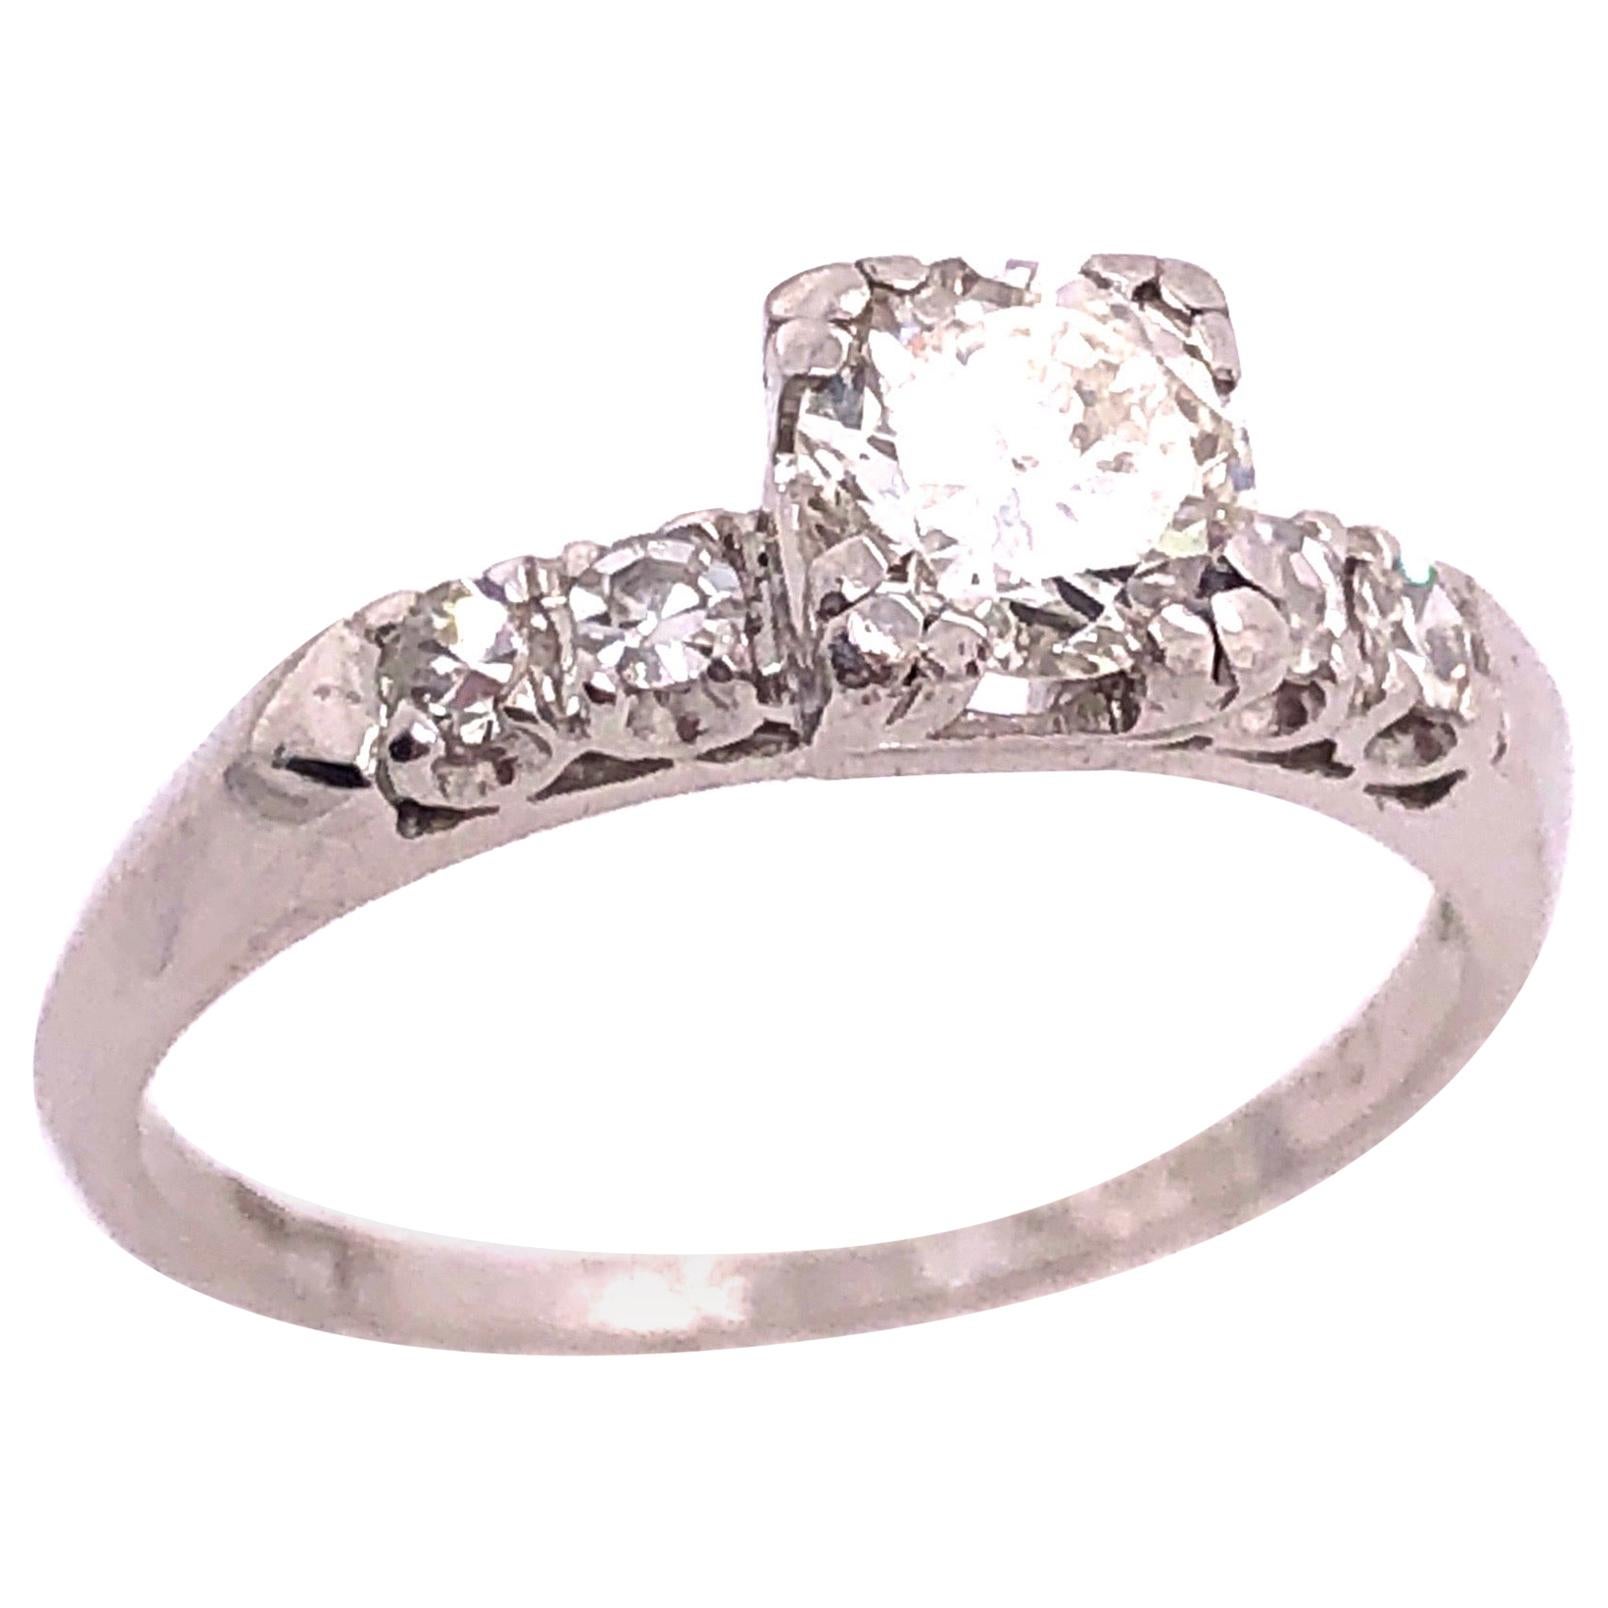 Platinum Diamond Engagement Ring 0.85 Total Diamond Weight For Sale